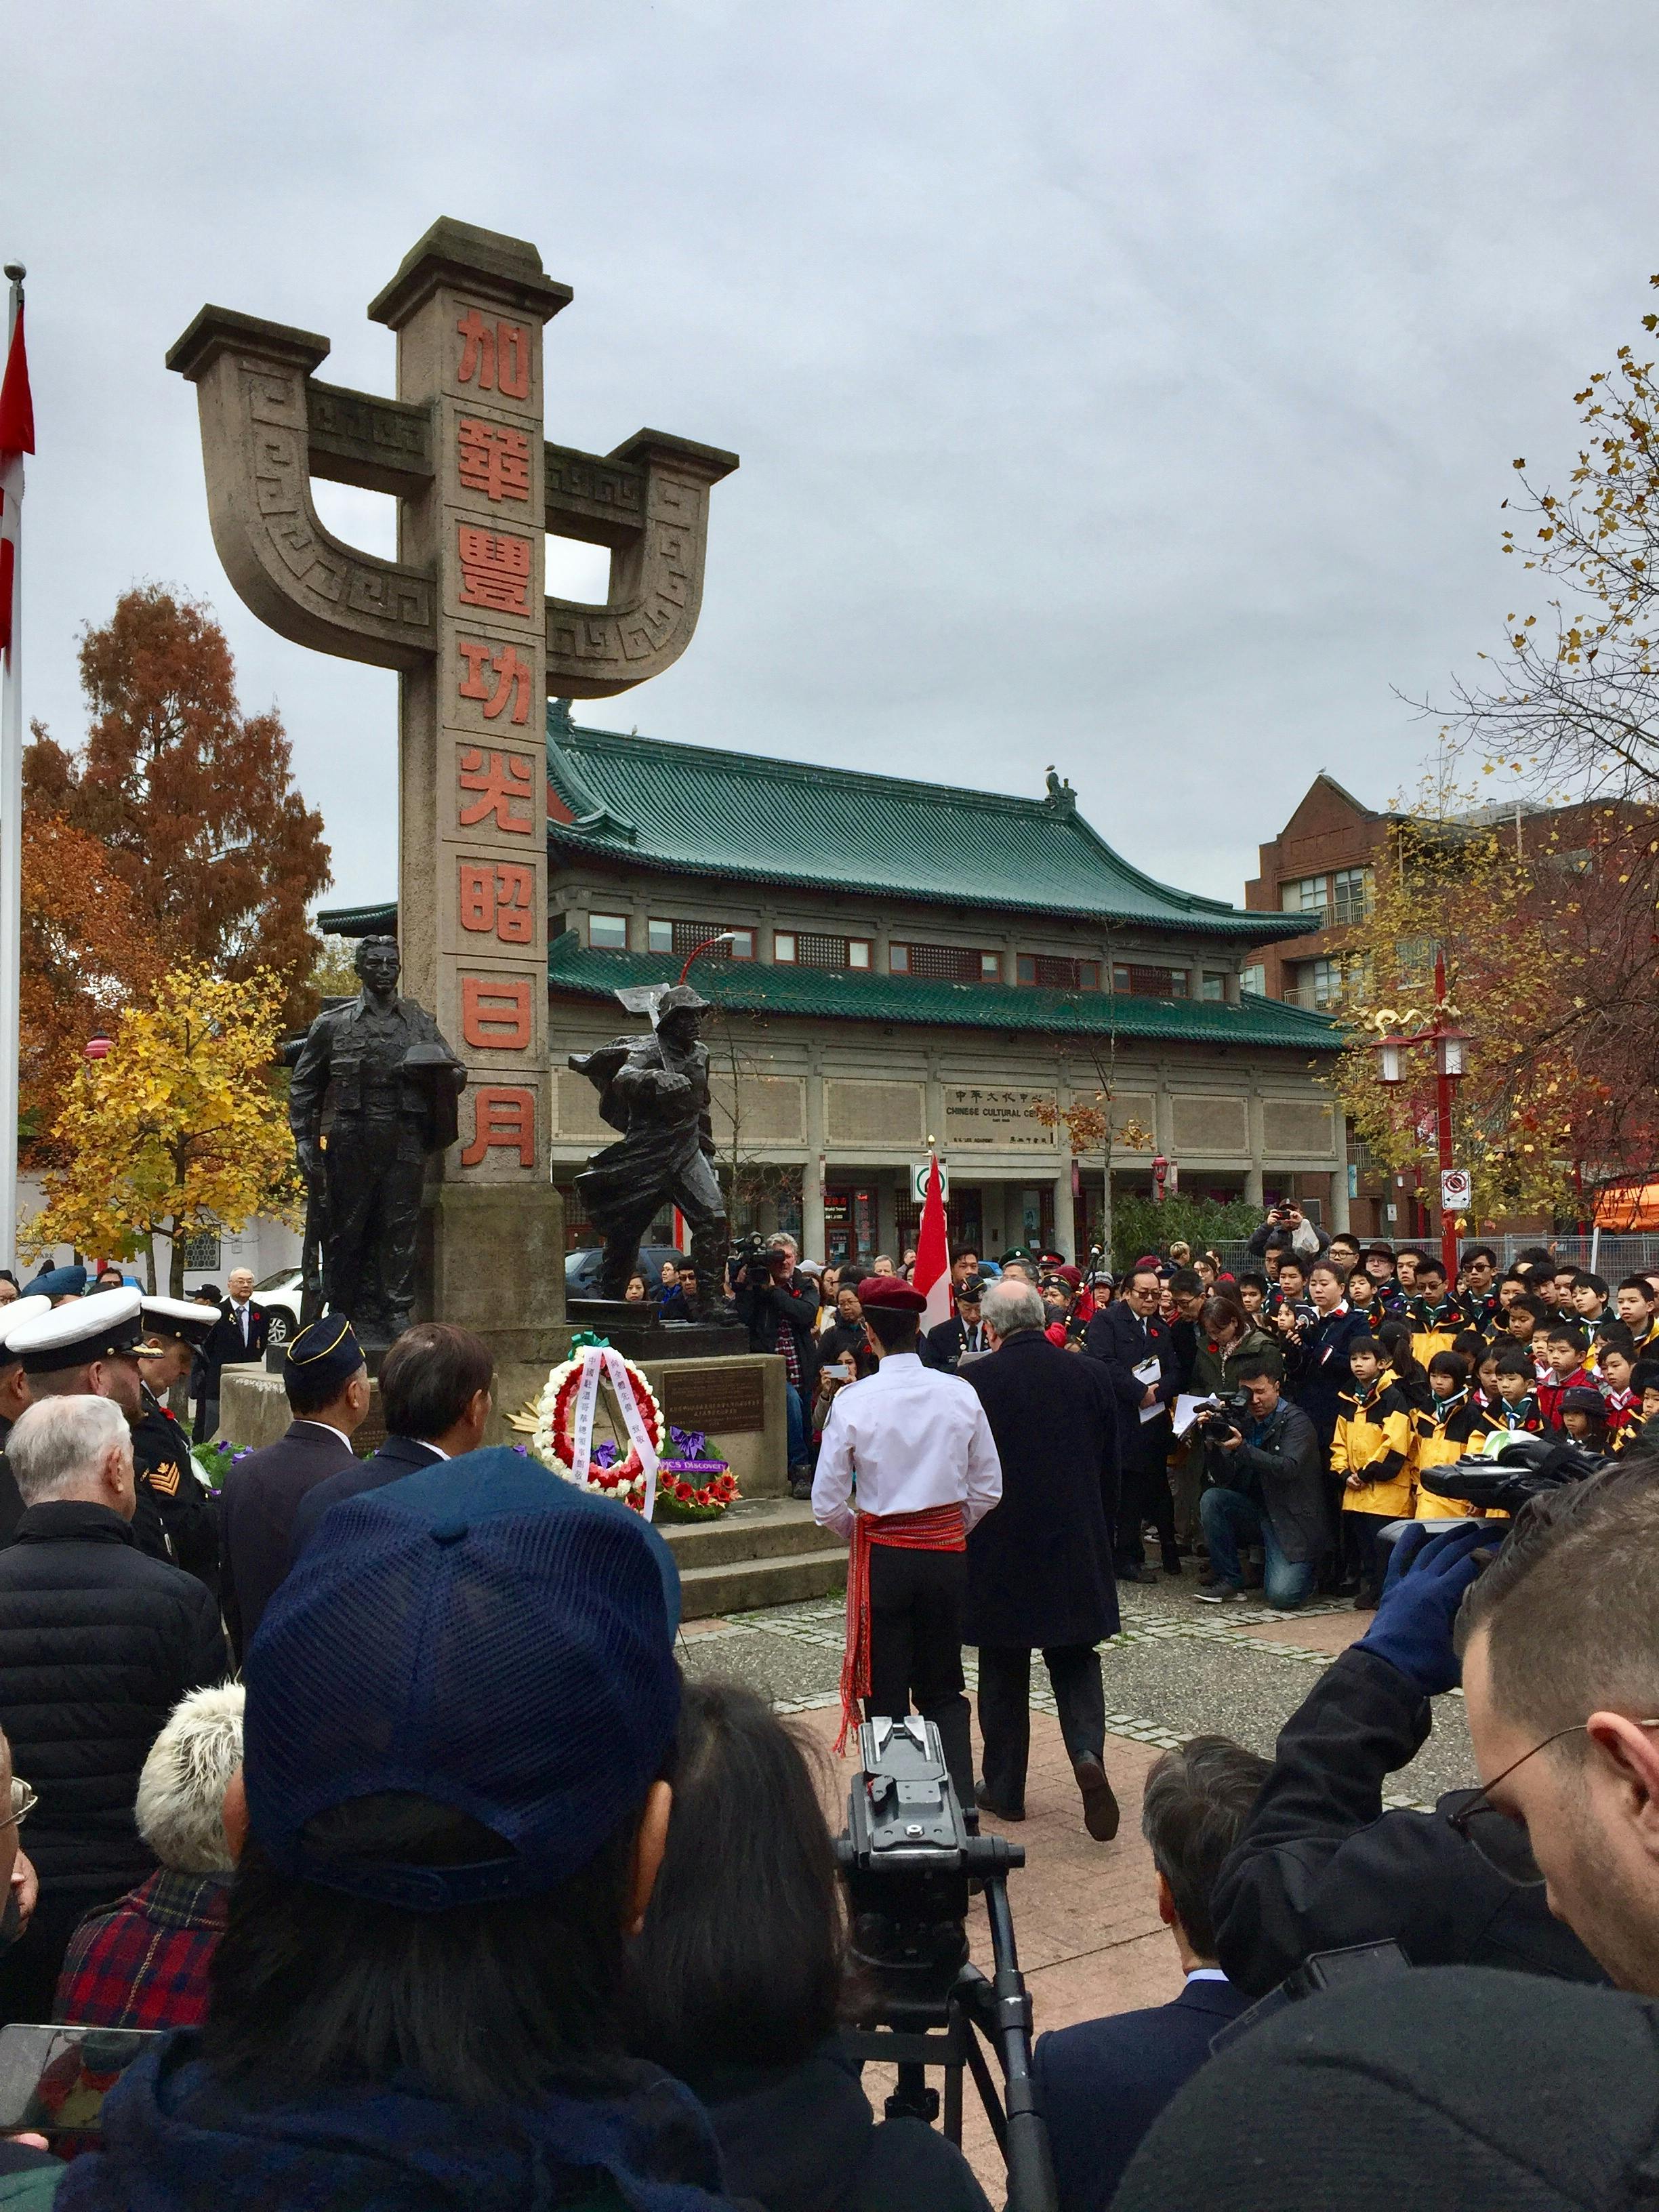 Several people surround the monument in Memorial Plaza, honouring the contributions of Chinese-Canadians to Canada